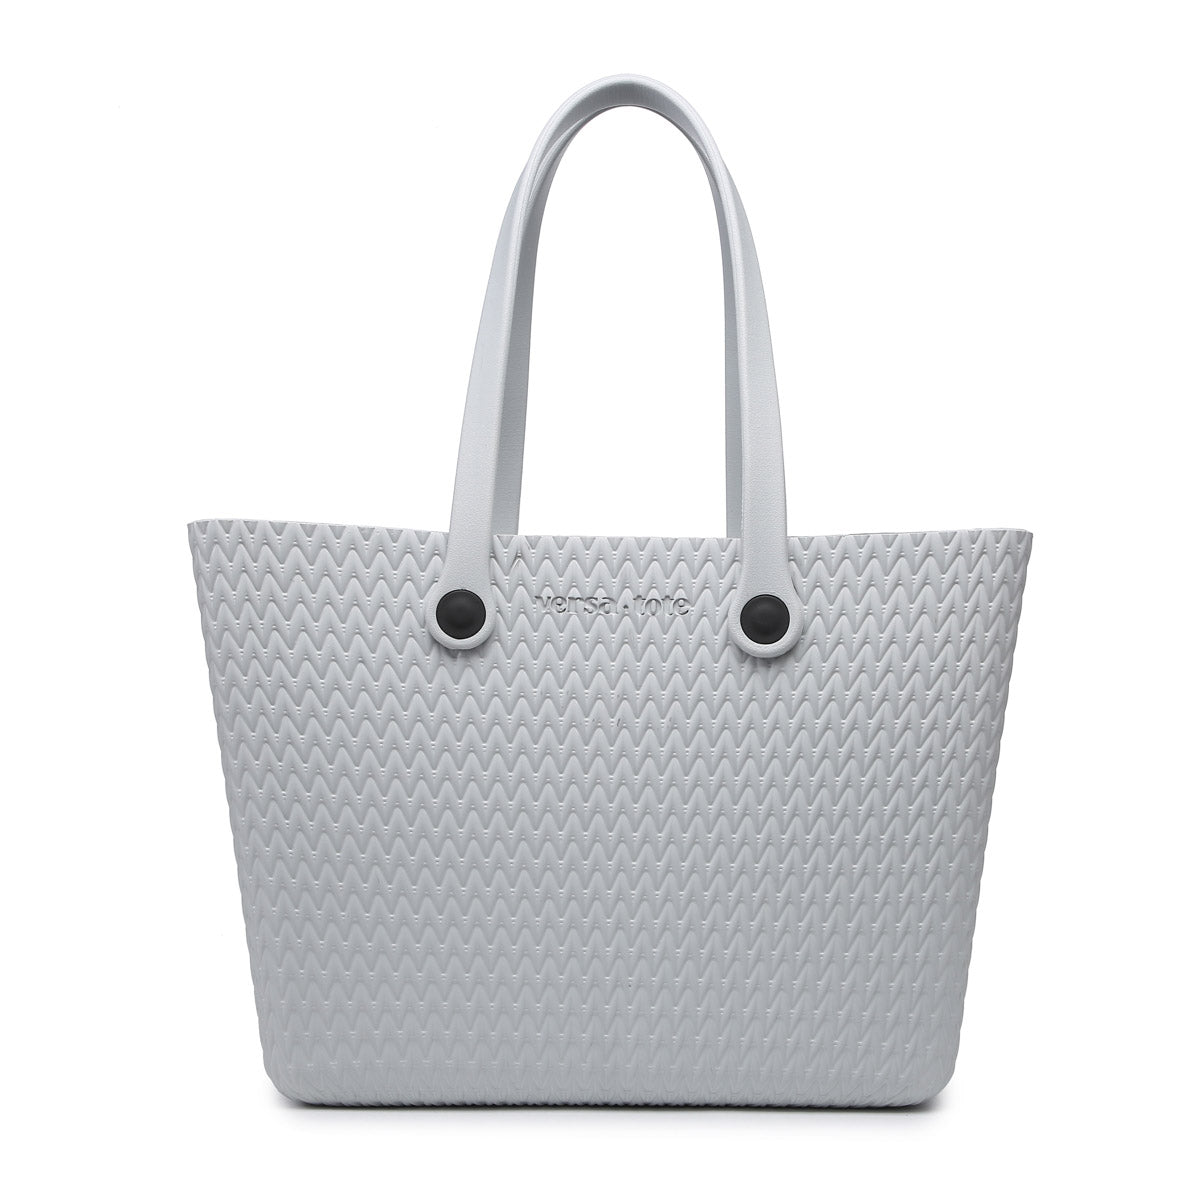 Sac fourre-tout - Carrie textured (Grey)